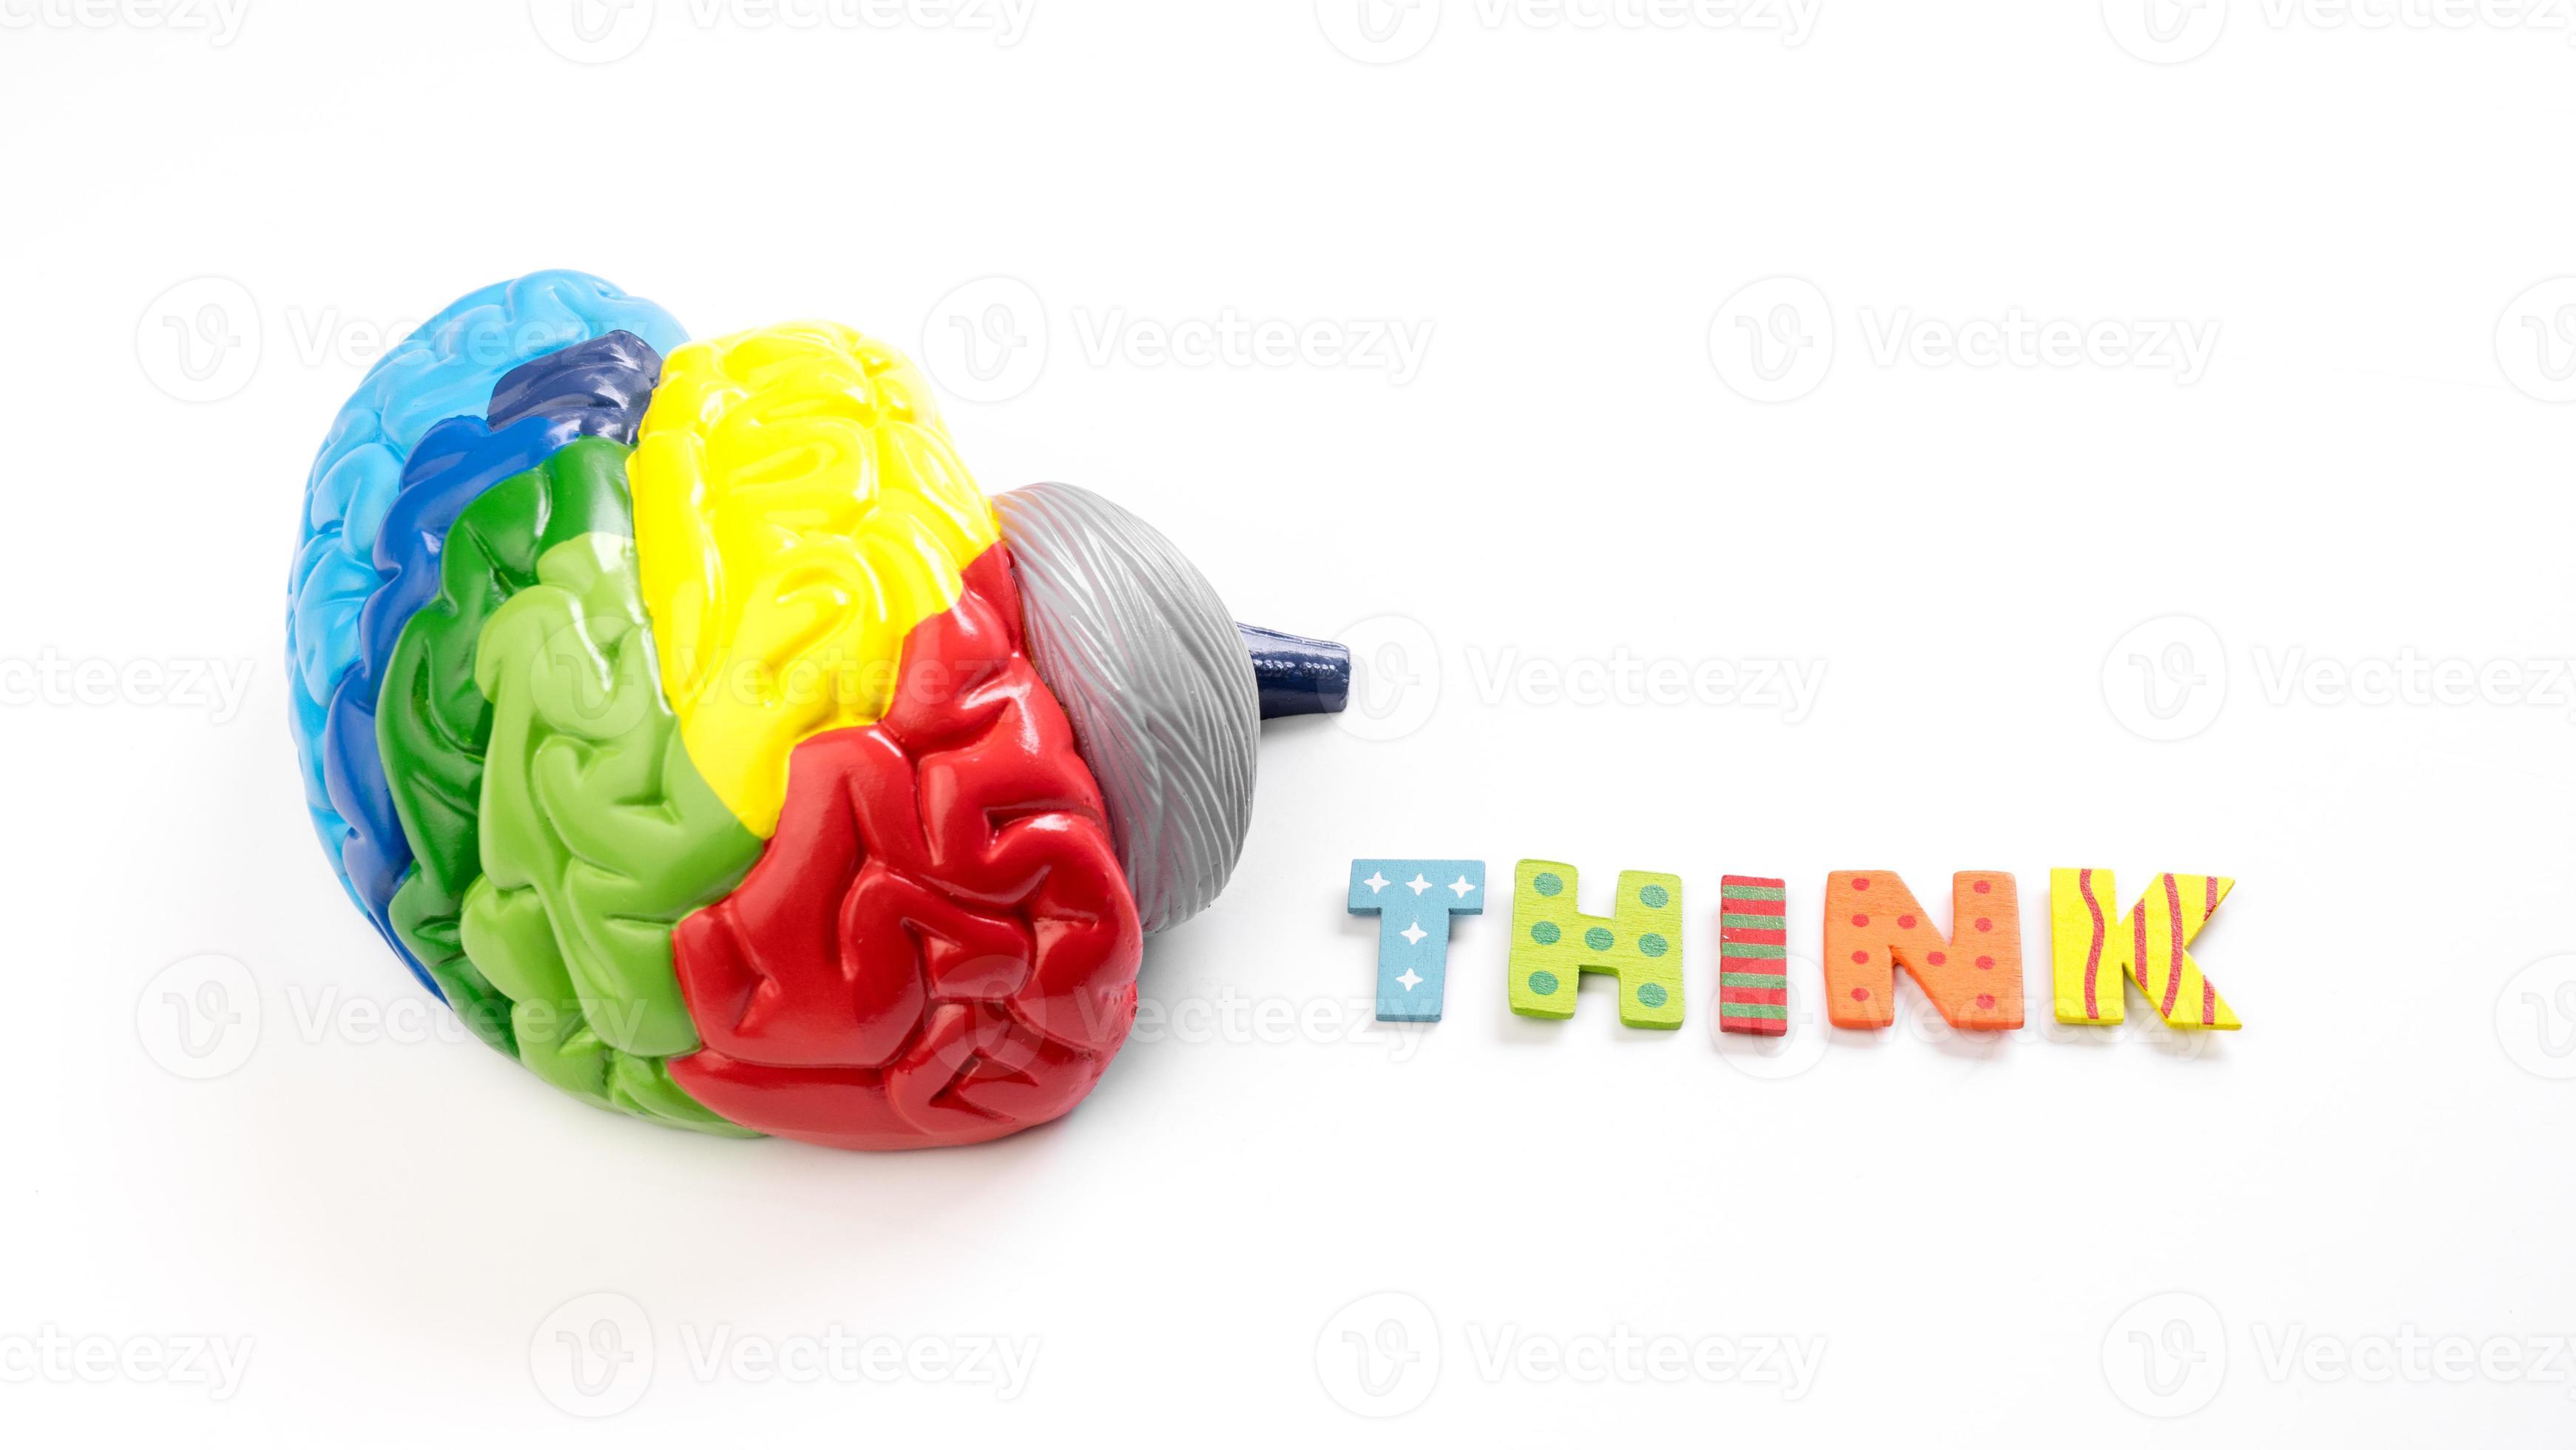 Colored Map Brain Anatomy Model With Letter Think 954391 Stock Photo At Vecteezy